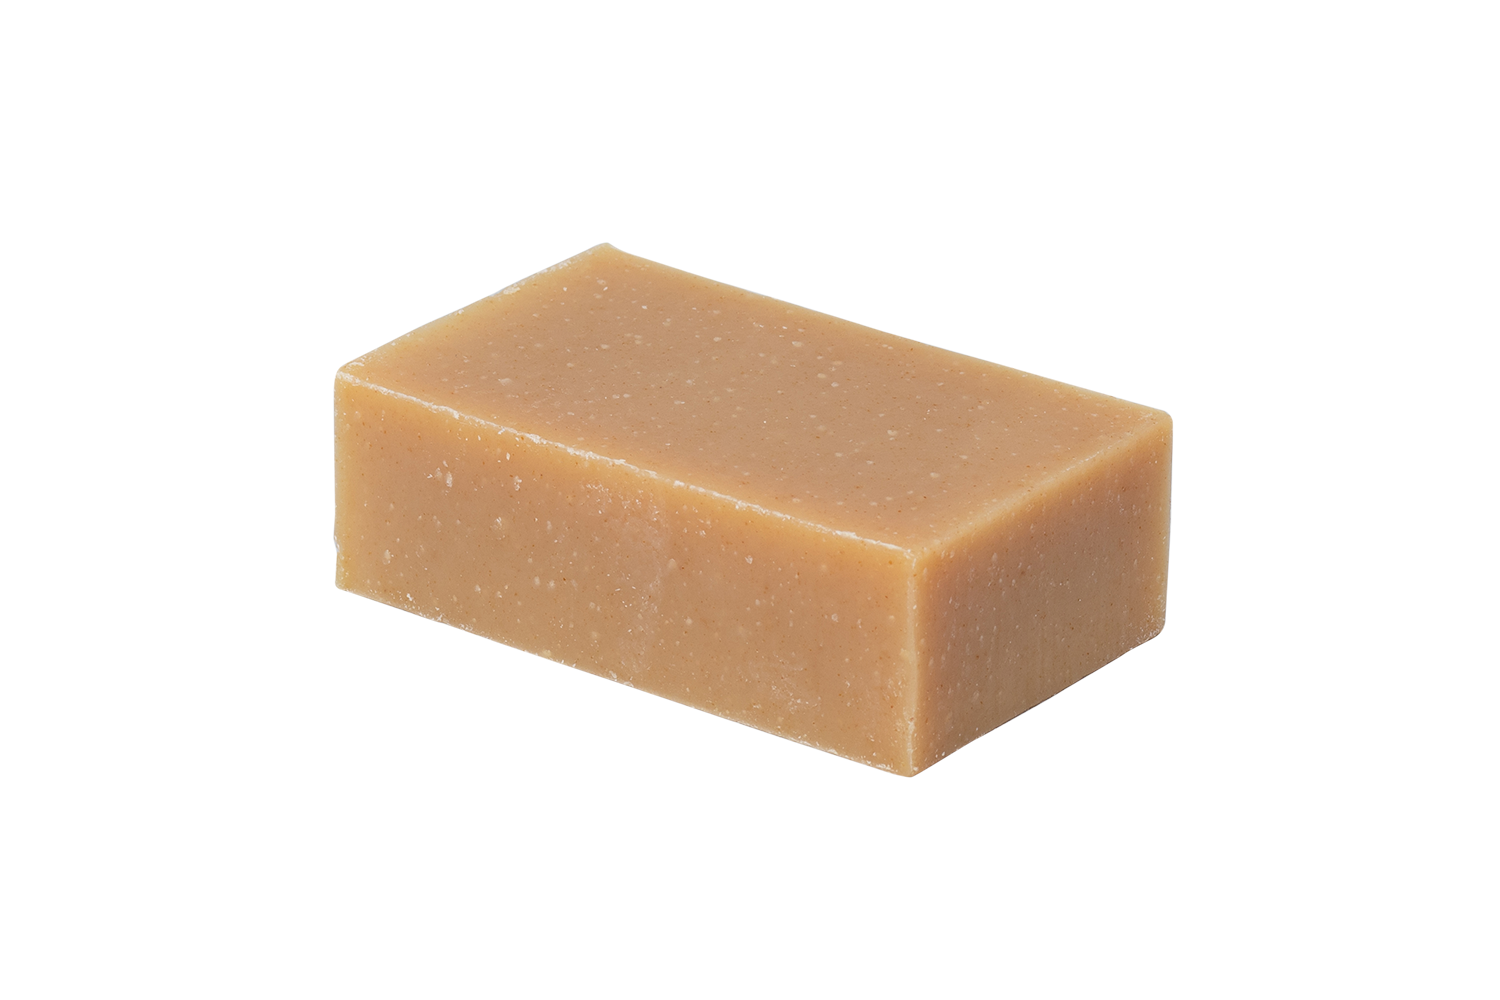 4 oz bar of patchouli scented soap